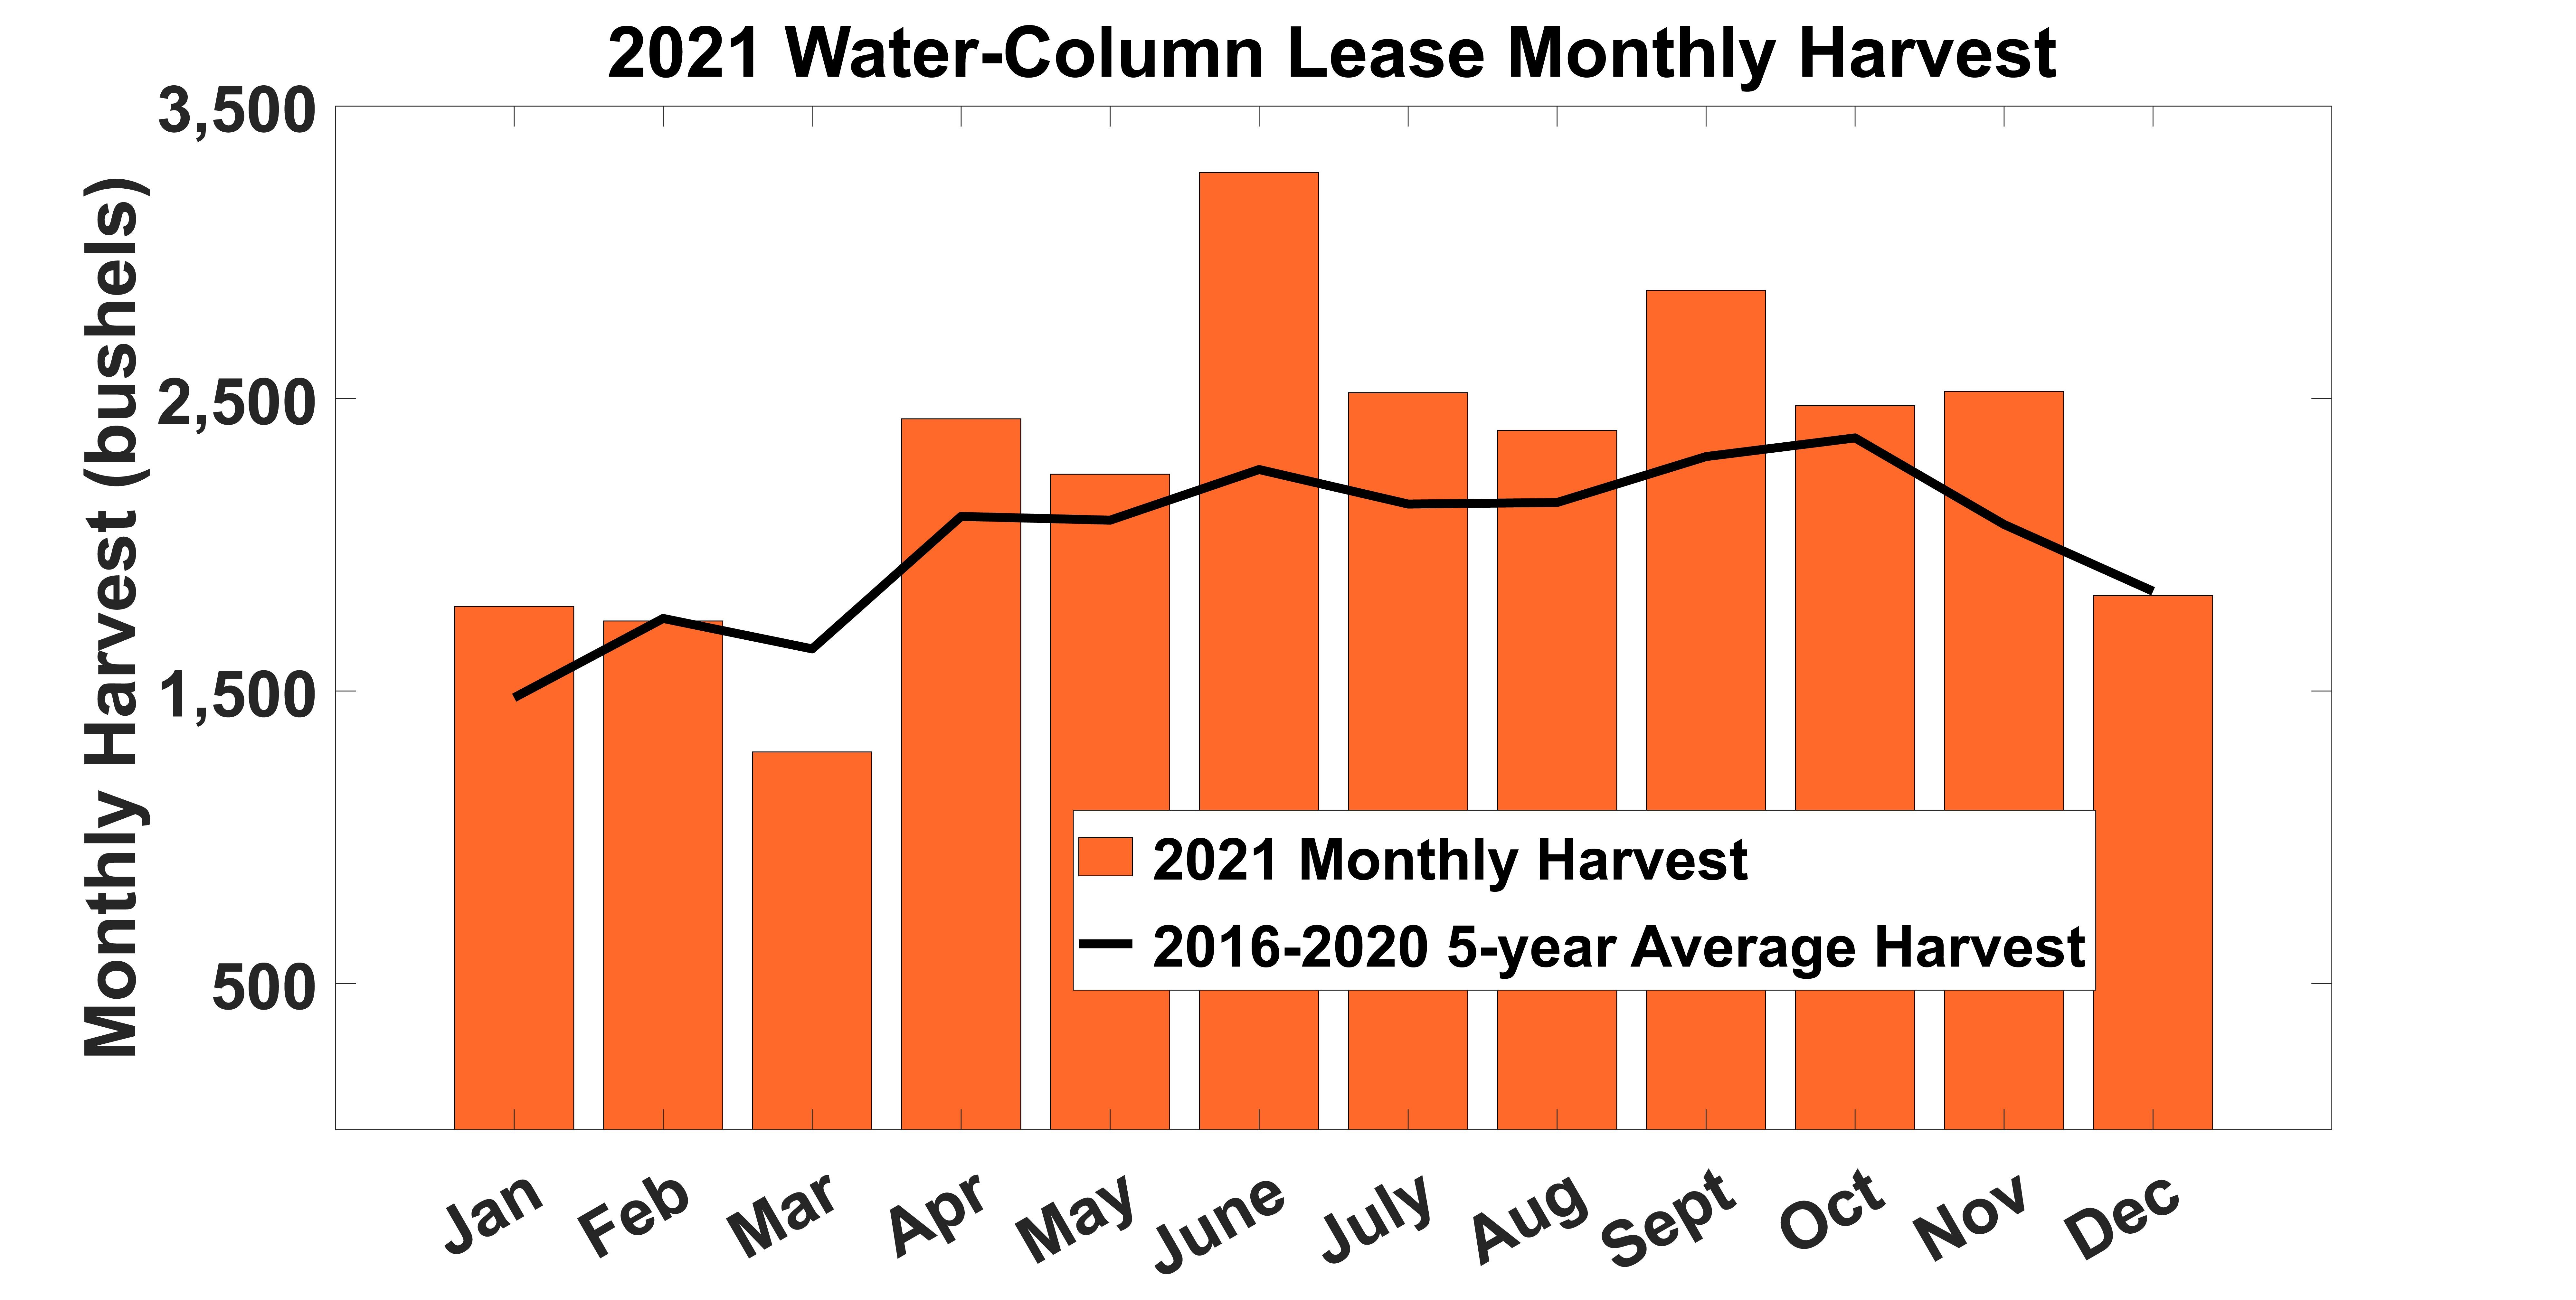 2021 monthly oyster harvest water-column leases in Maryland bar graph